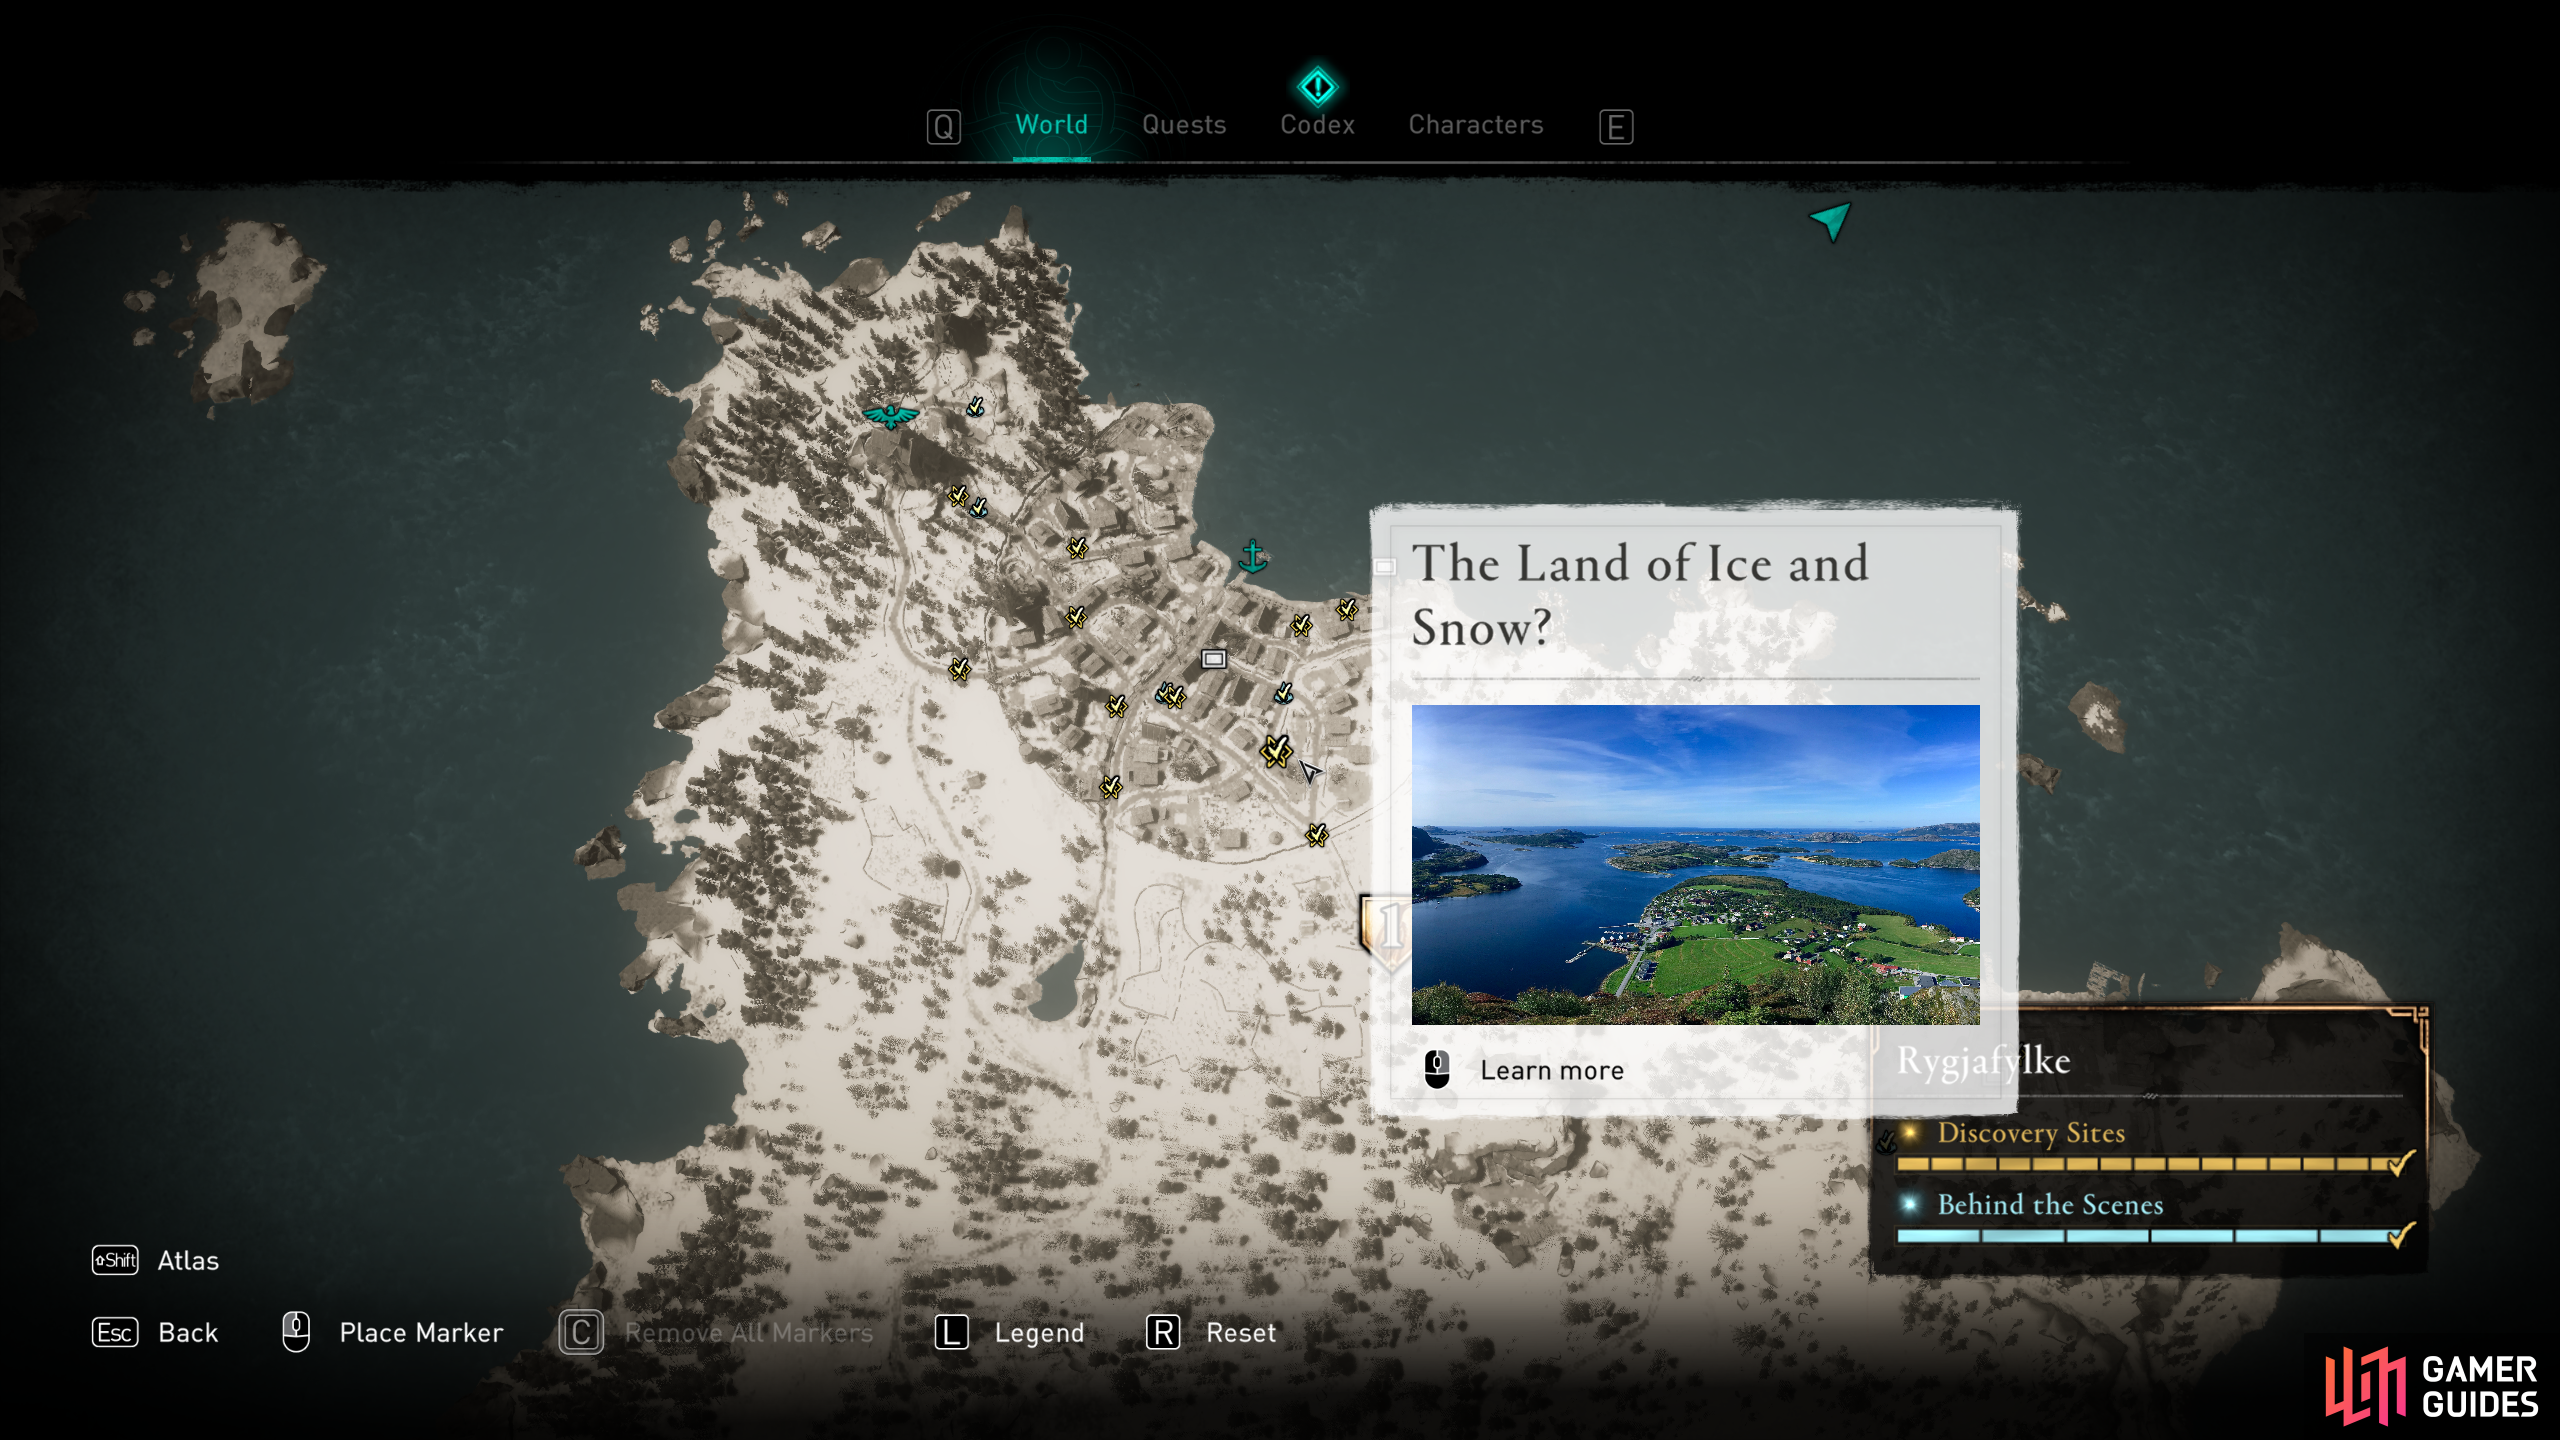 Youll find Discovery Sites throughout the map, marked as gold icons.